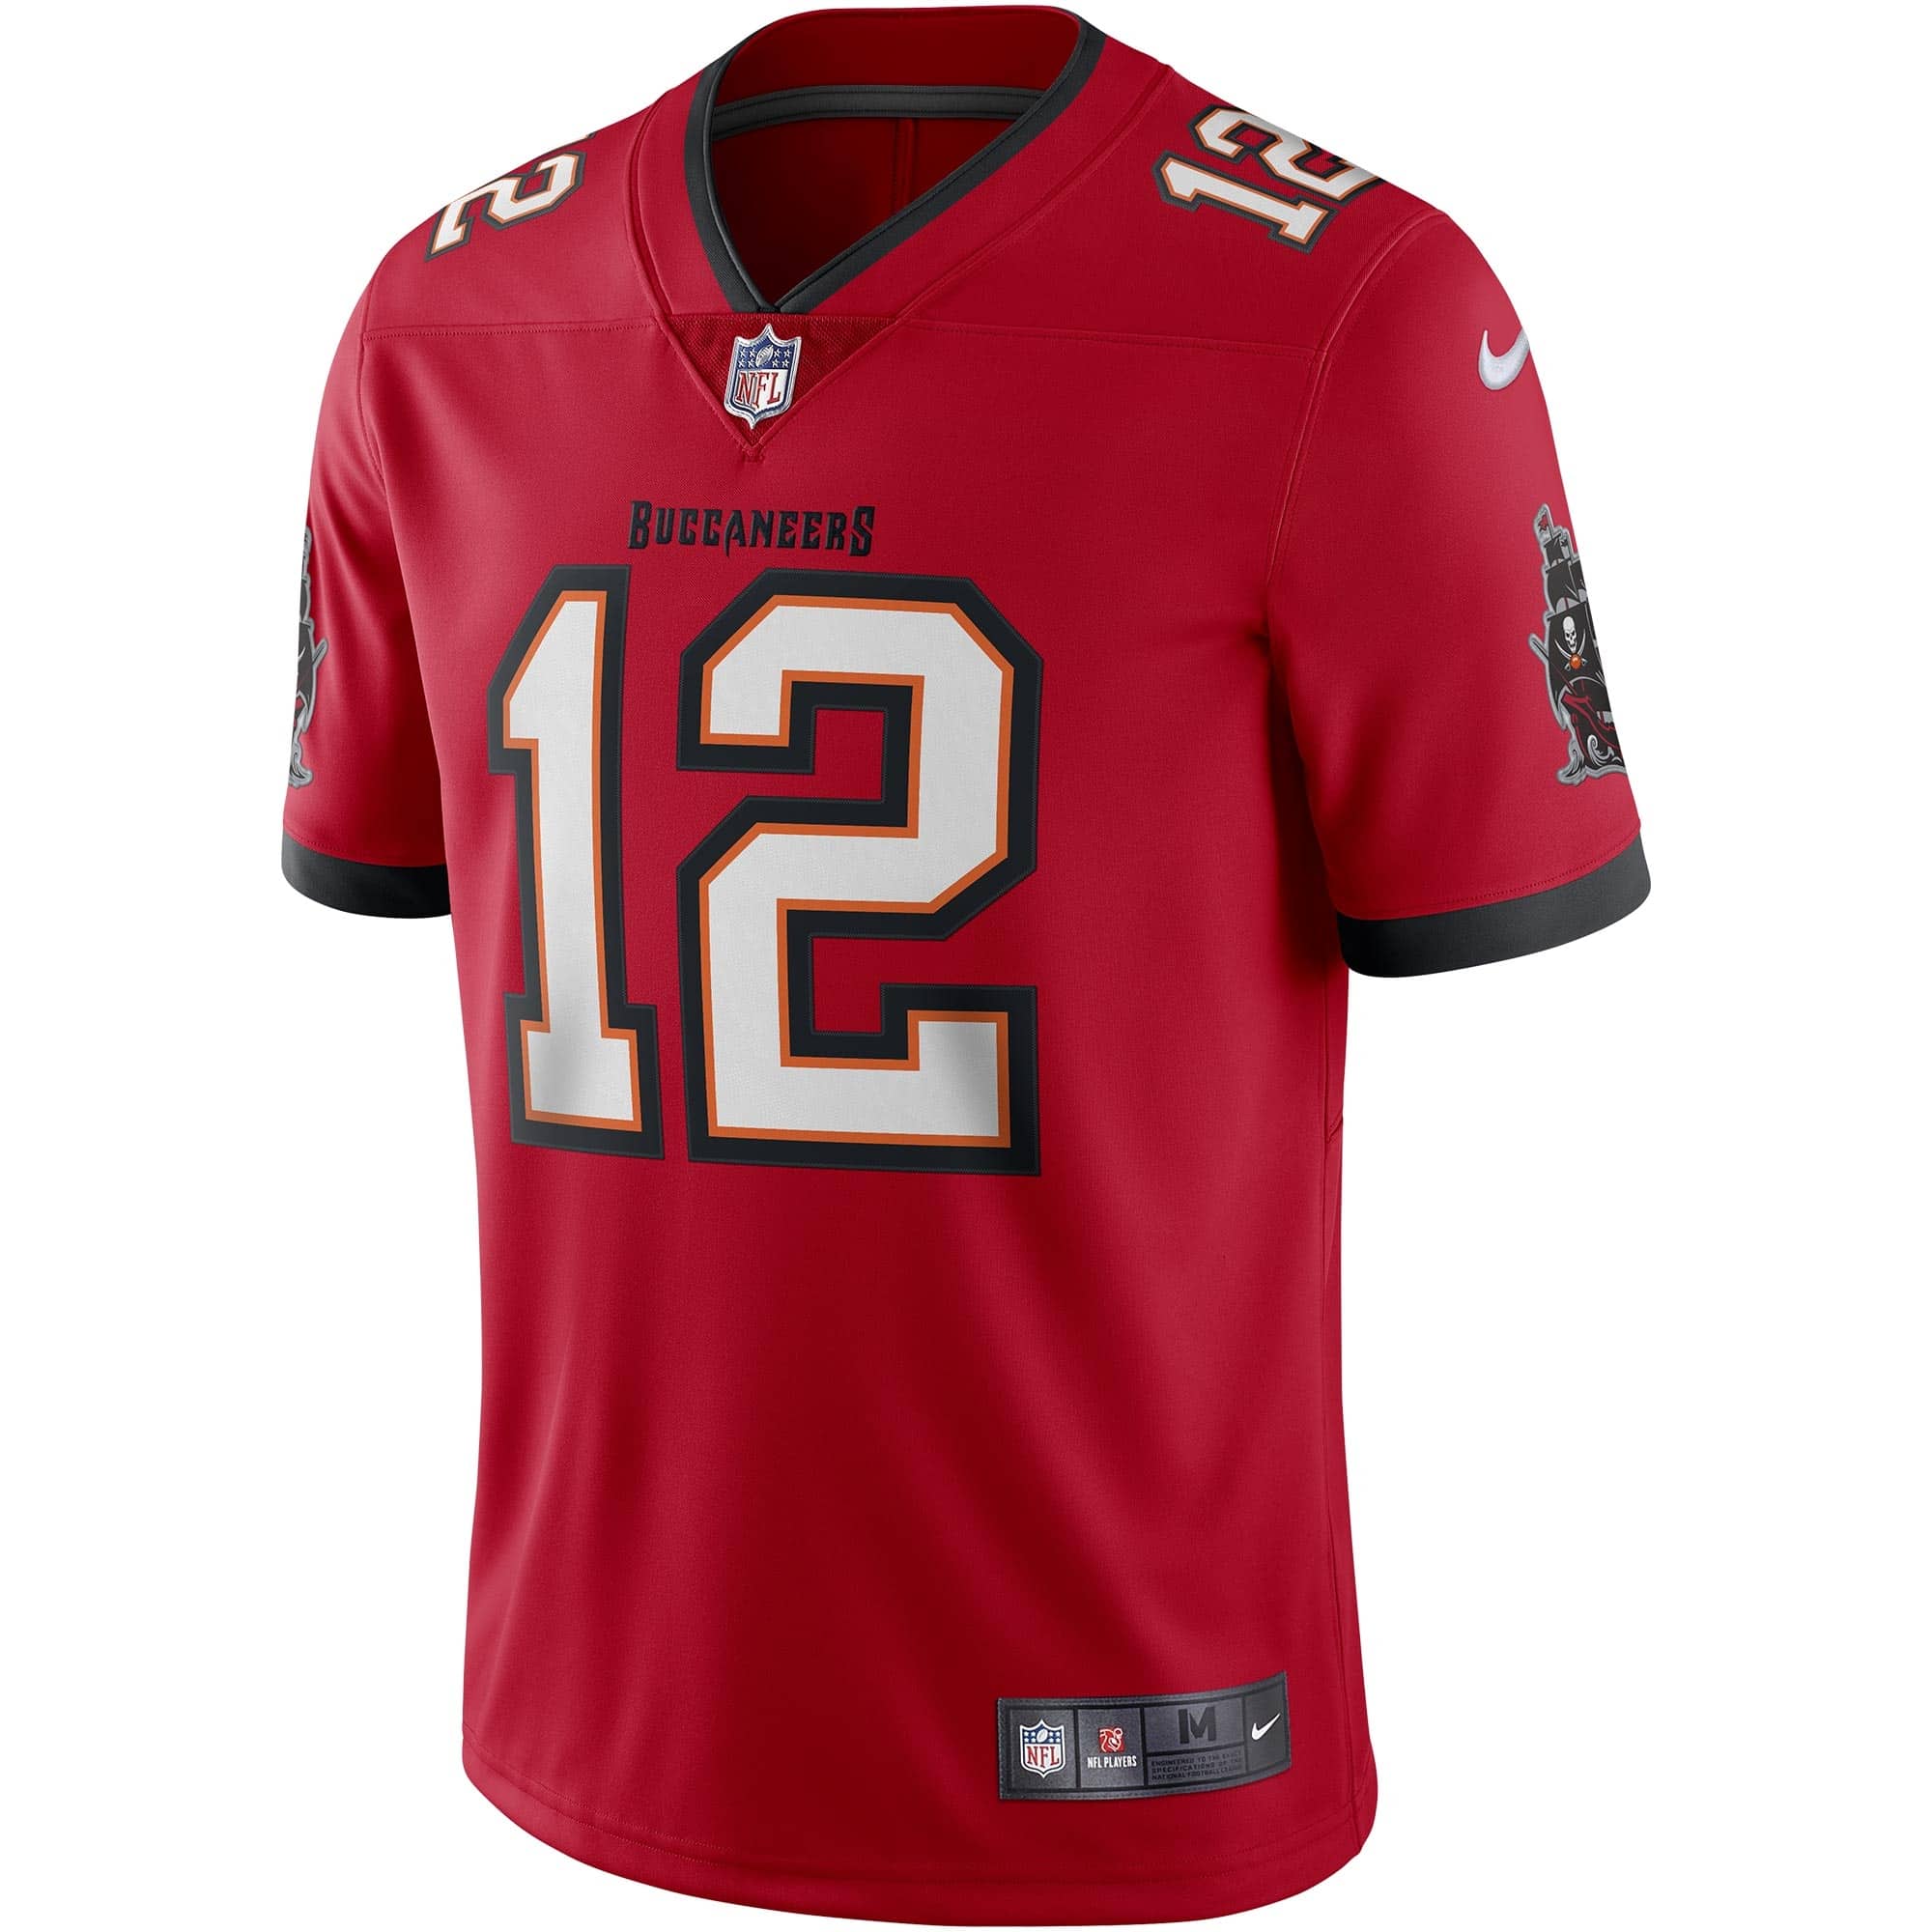 Tom Brady Tampa Bay Buccaneers Nike NFL Limited Jersey - Red